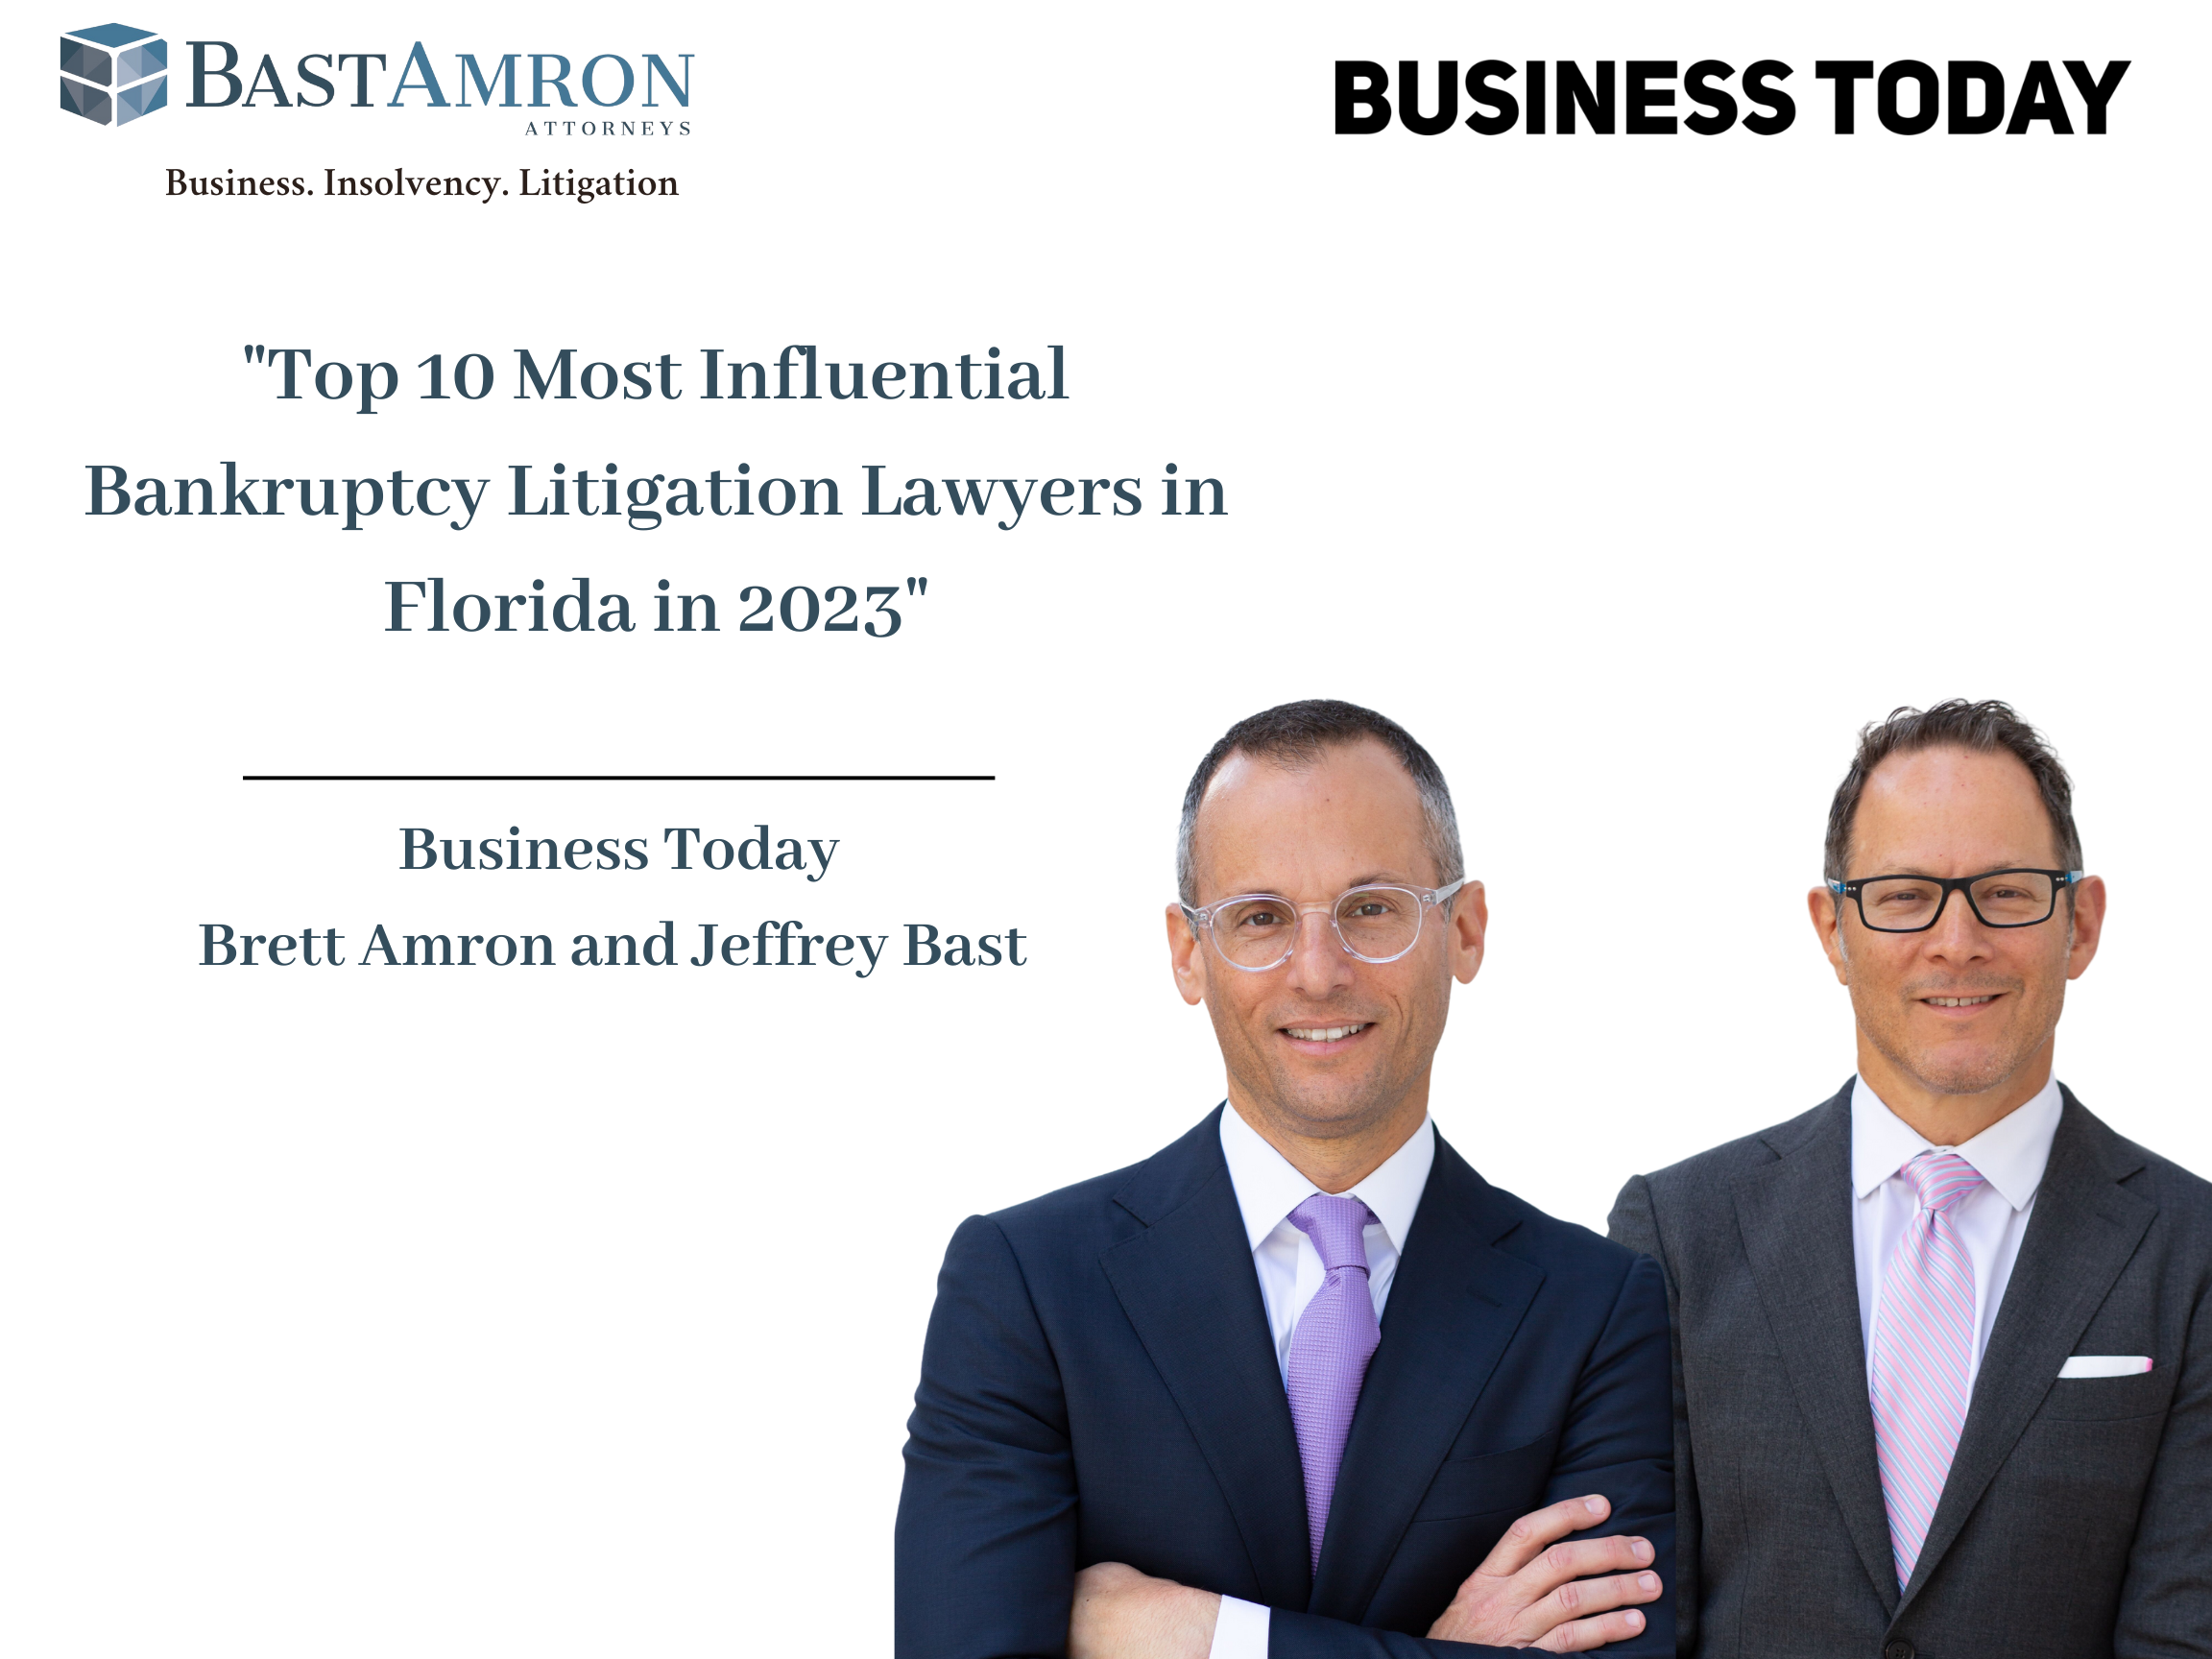 BRETT M. AMRON AND JEFFREY BAST FEATURED BY BUSINESS TODAY AS THE “TOP 10 MOST INFLUENTIAL BANKRUPTCY LITIGATION LAWYERS IN FLORIDA IN 2023”